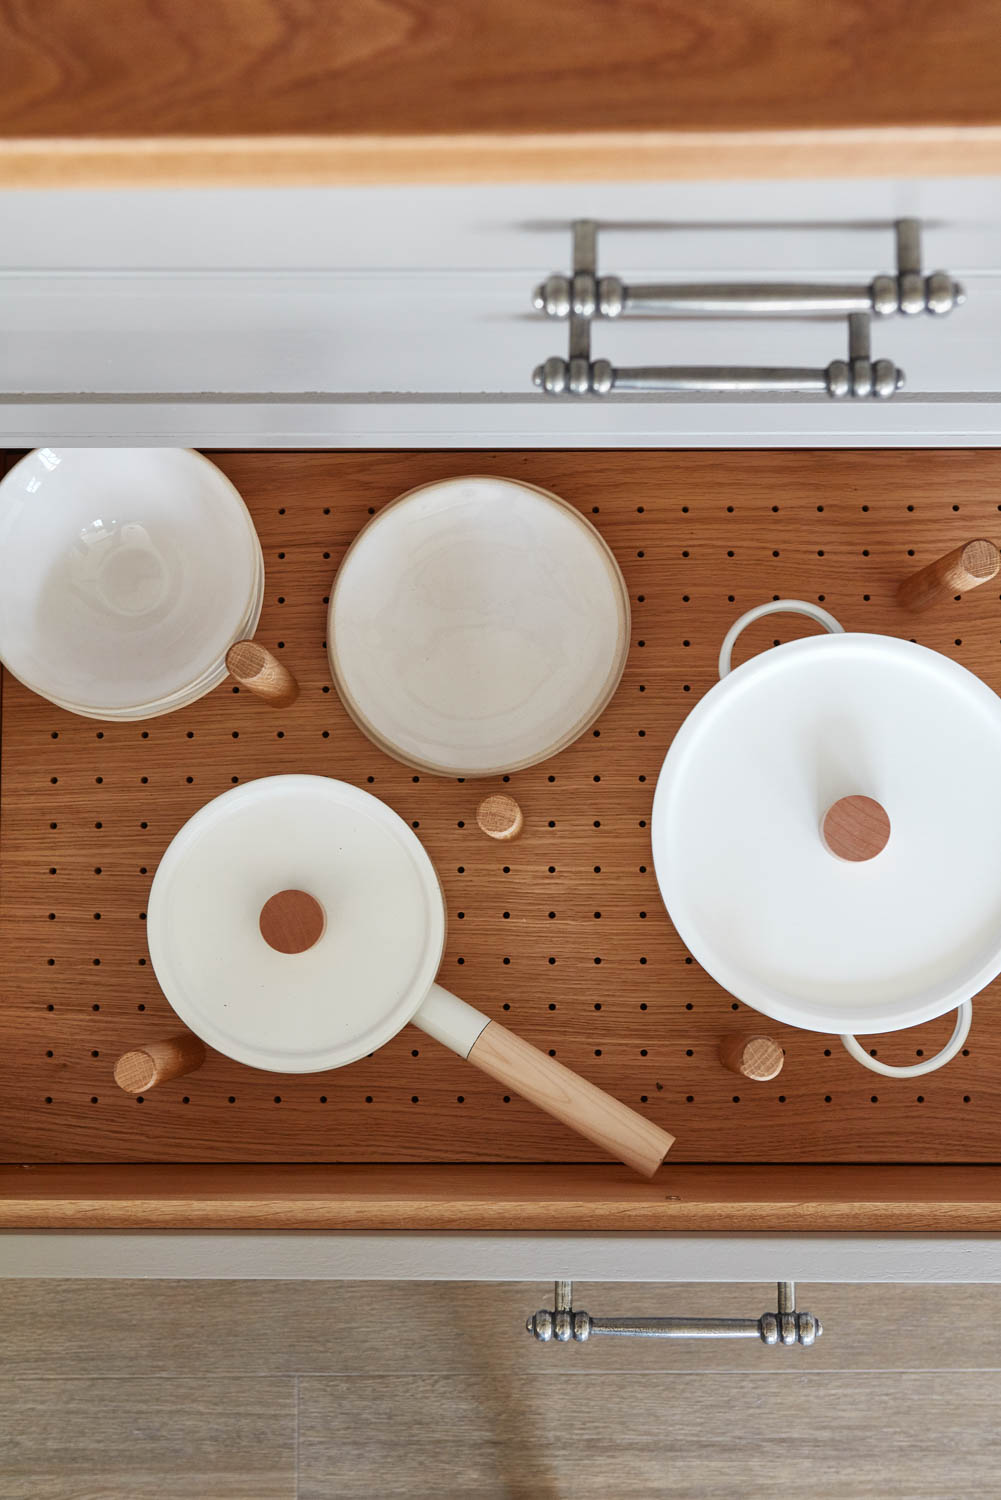 Bespoke in-drawer peg boards for pots and pans